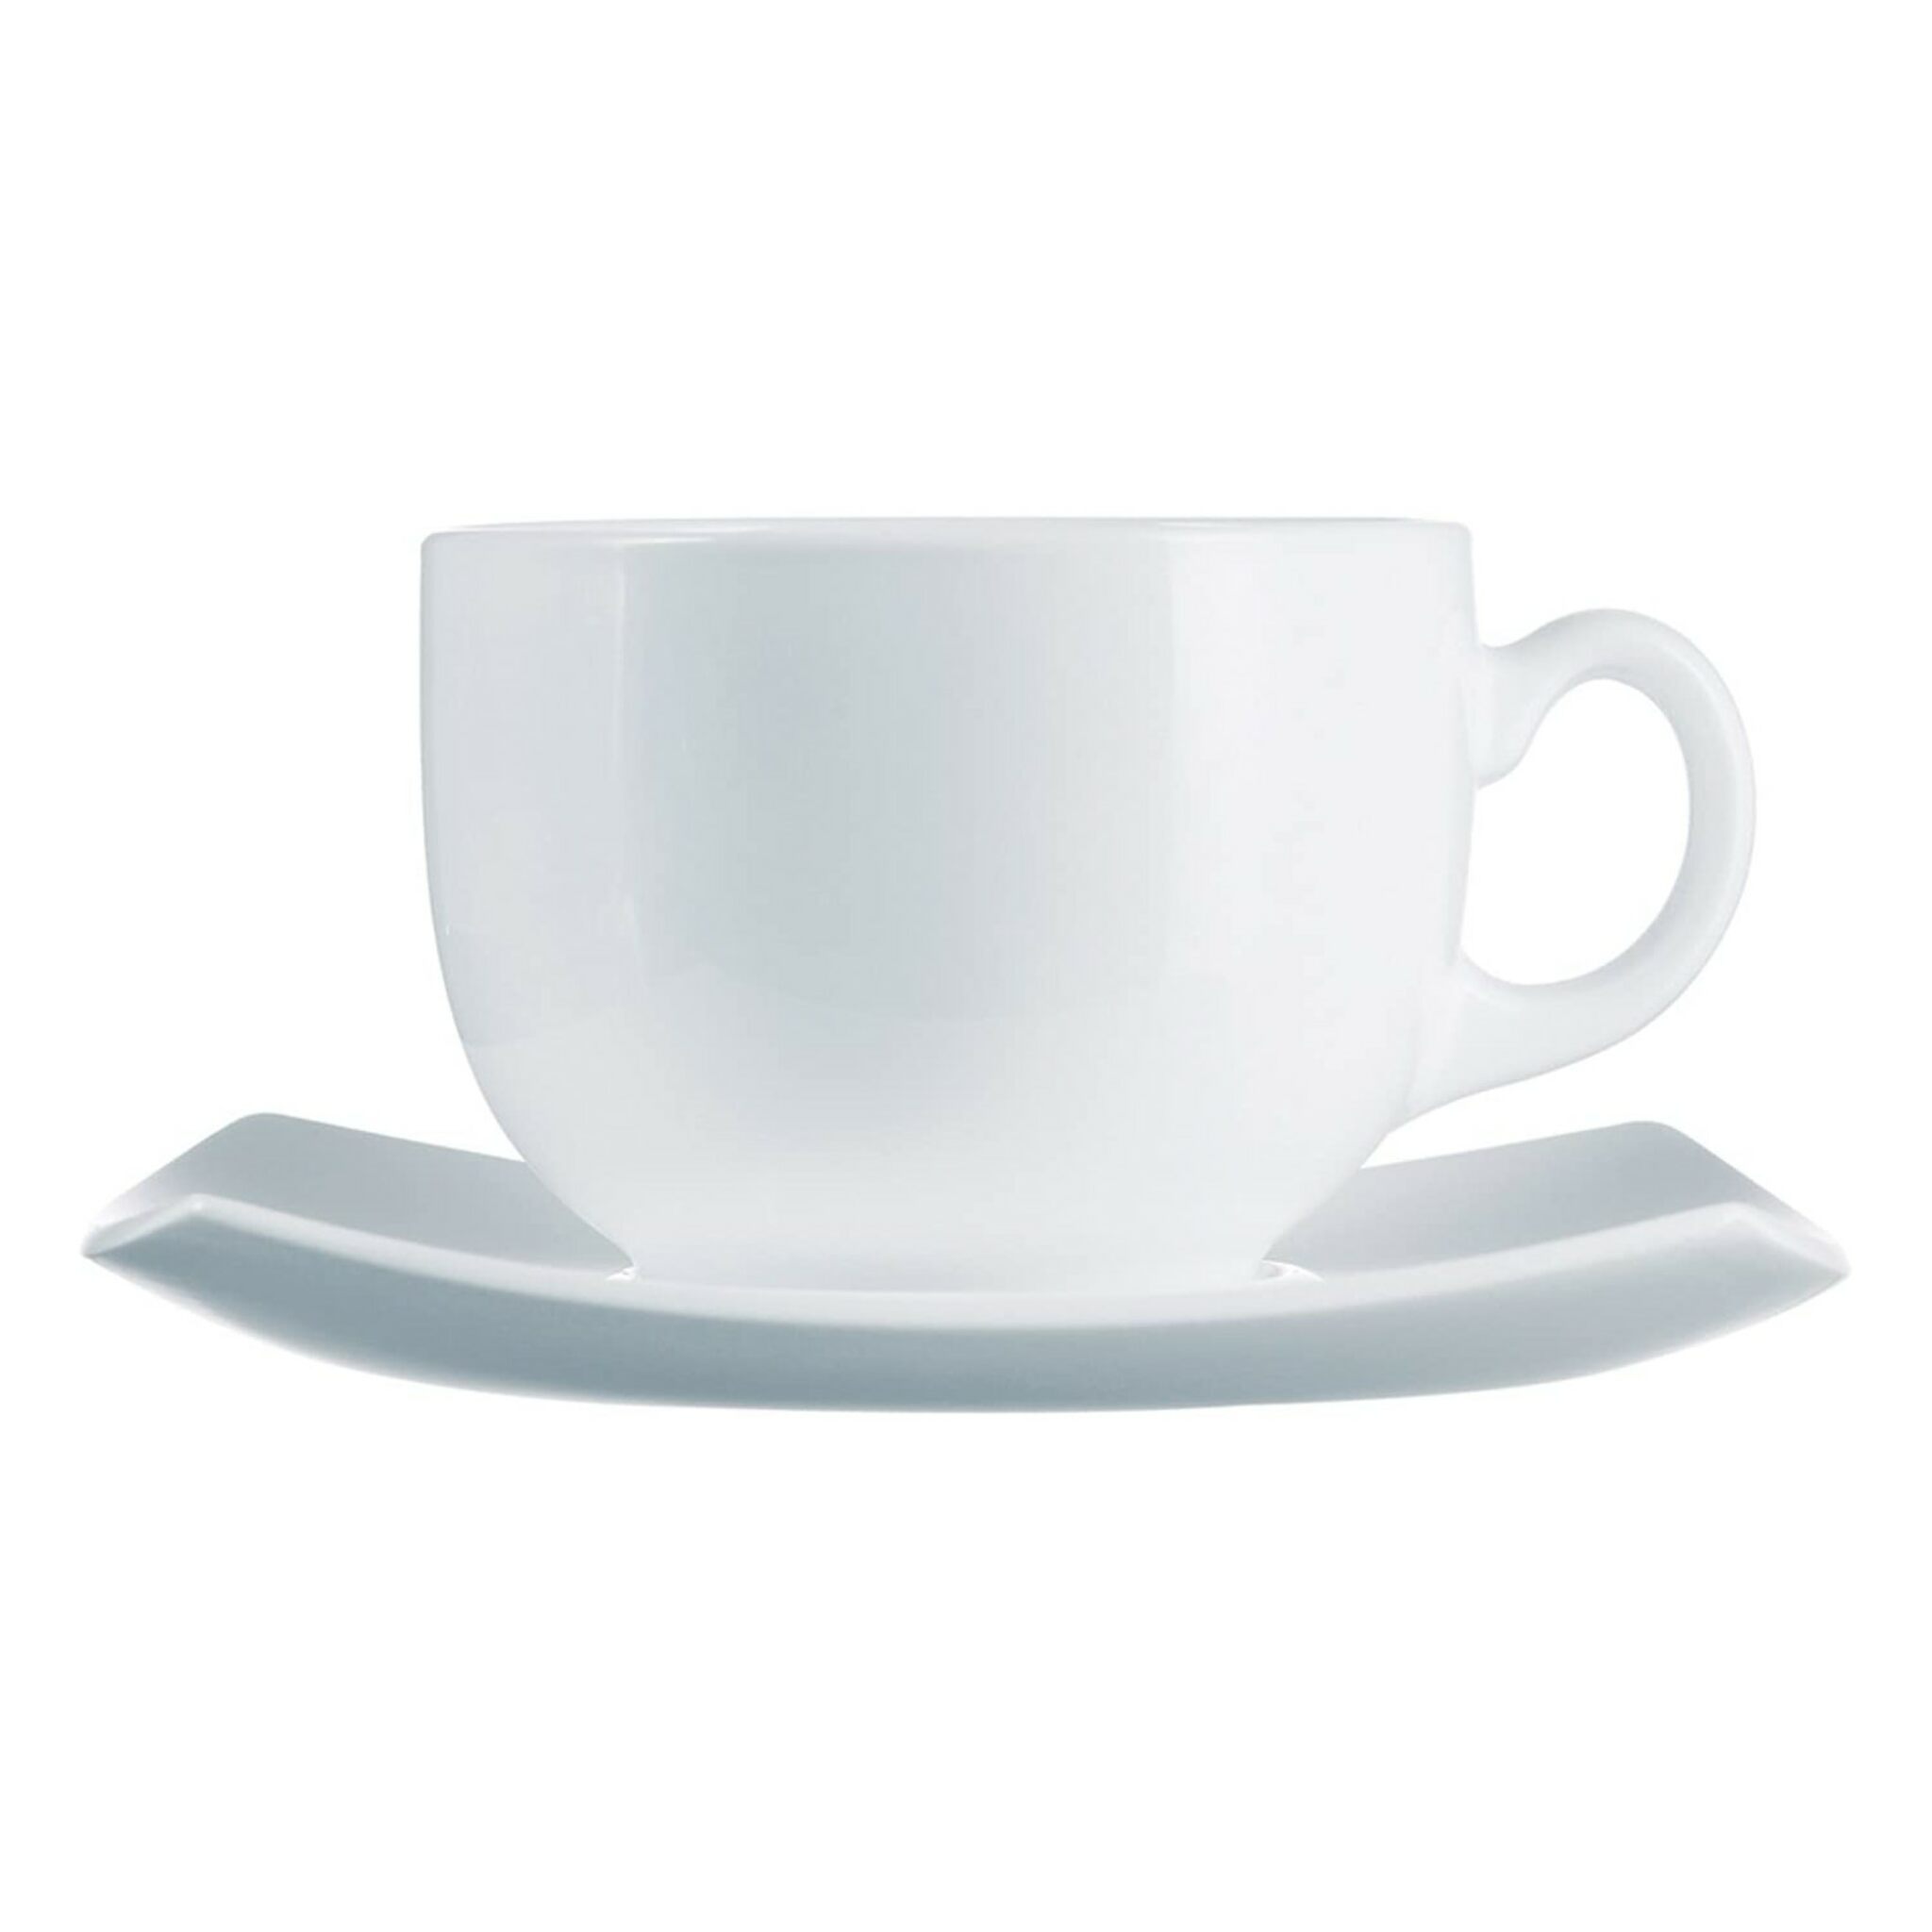 Arcoroc cup and saucer DELICE